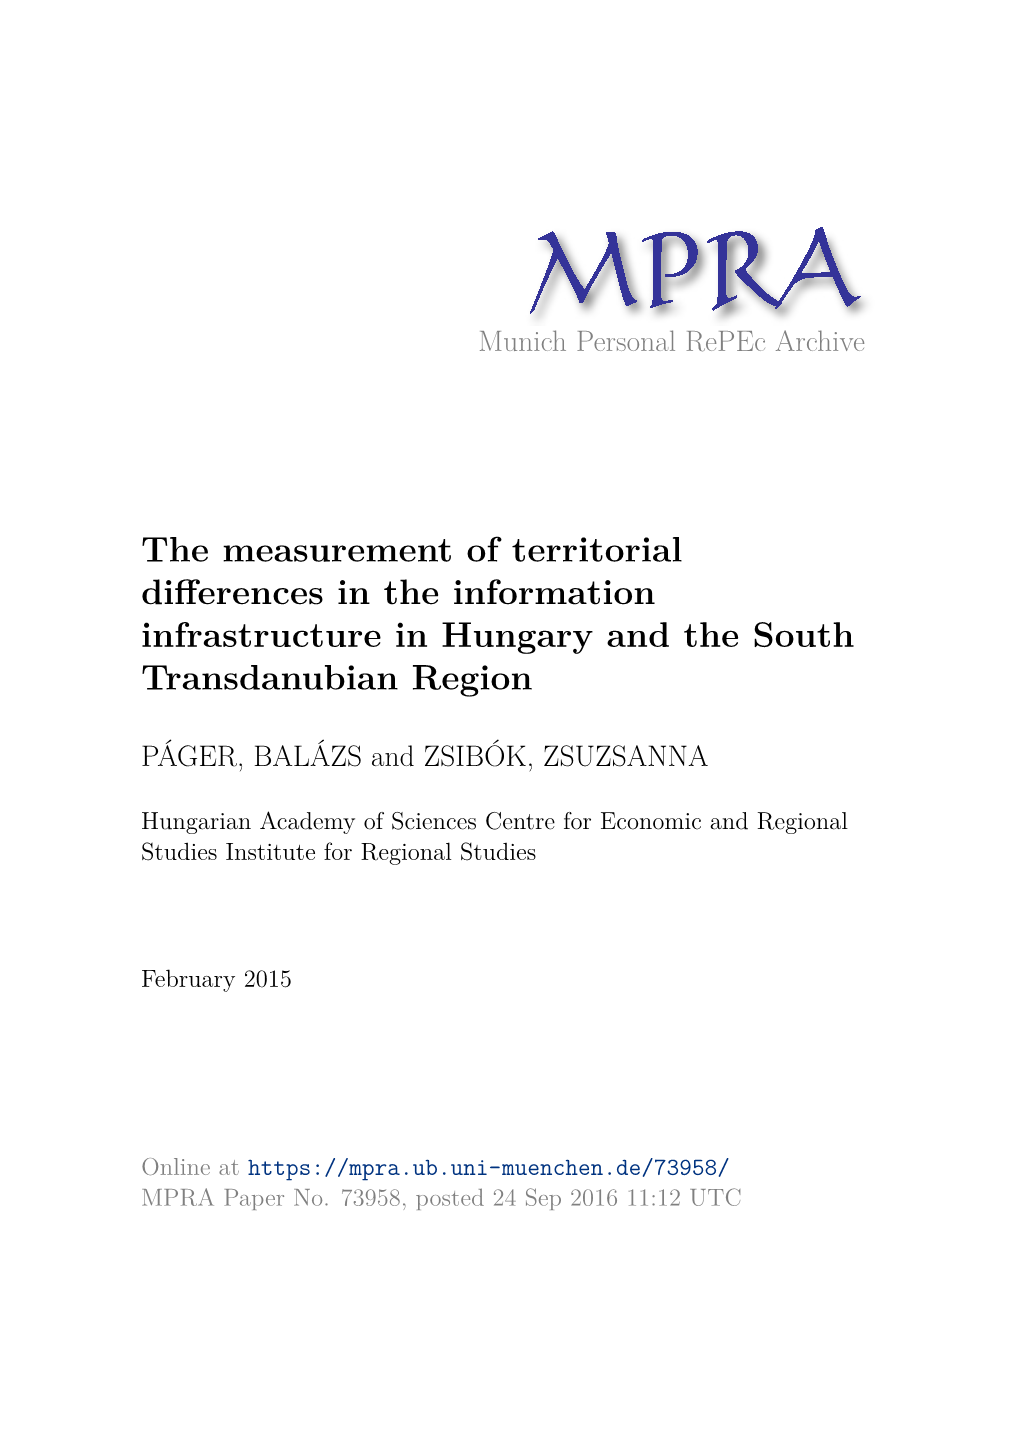 The Measurement of Territorial Differences in the Information Infrastructure in Hungary and the South Transdanubian Region**